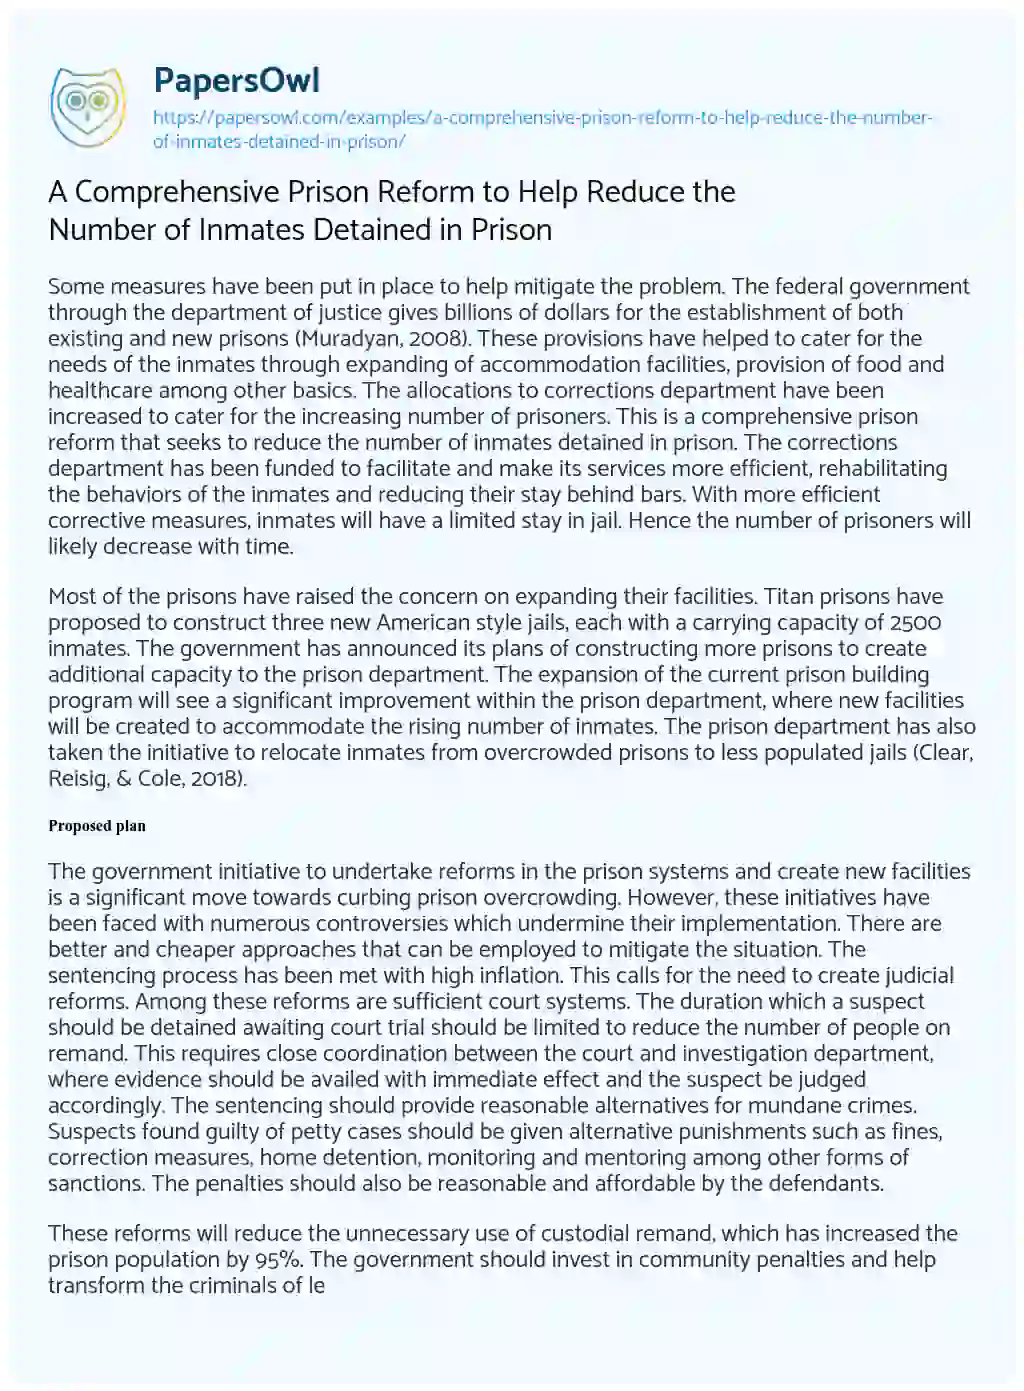 Essay on A Comprehensive Prison Reform to Help Reduce the Number of Inmates Detained in Prison